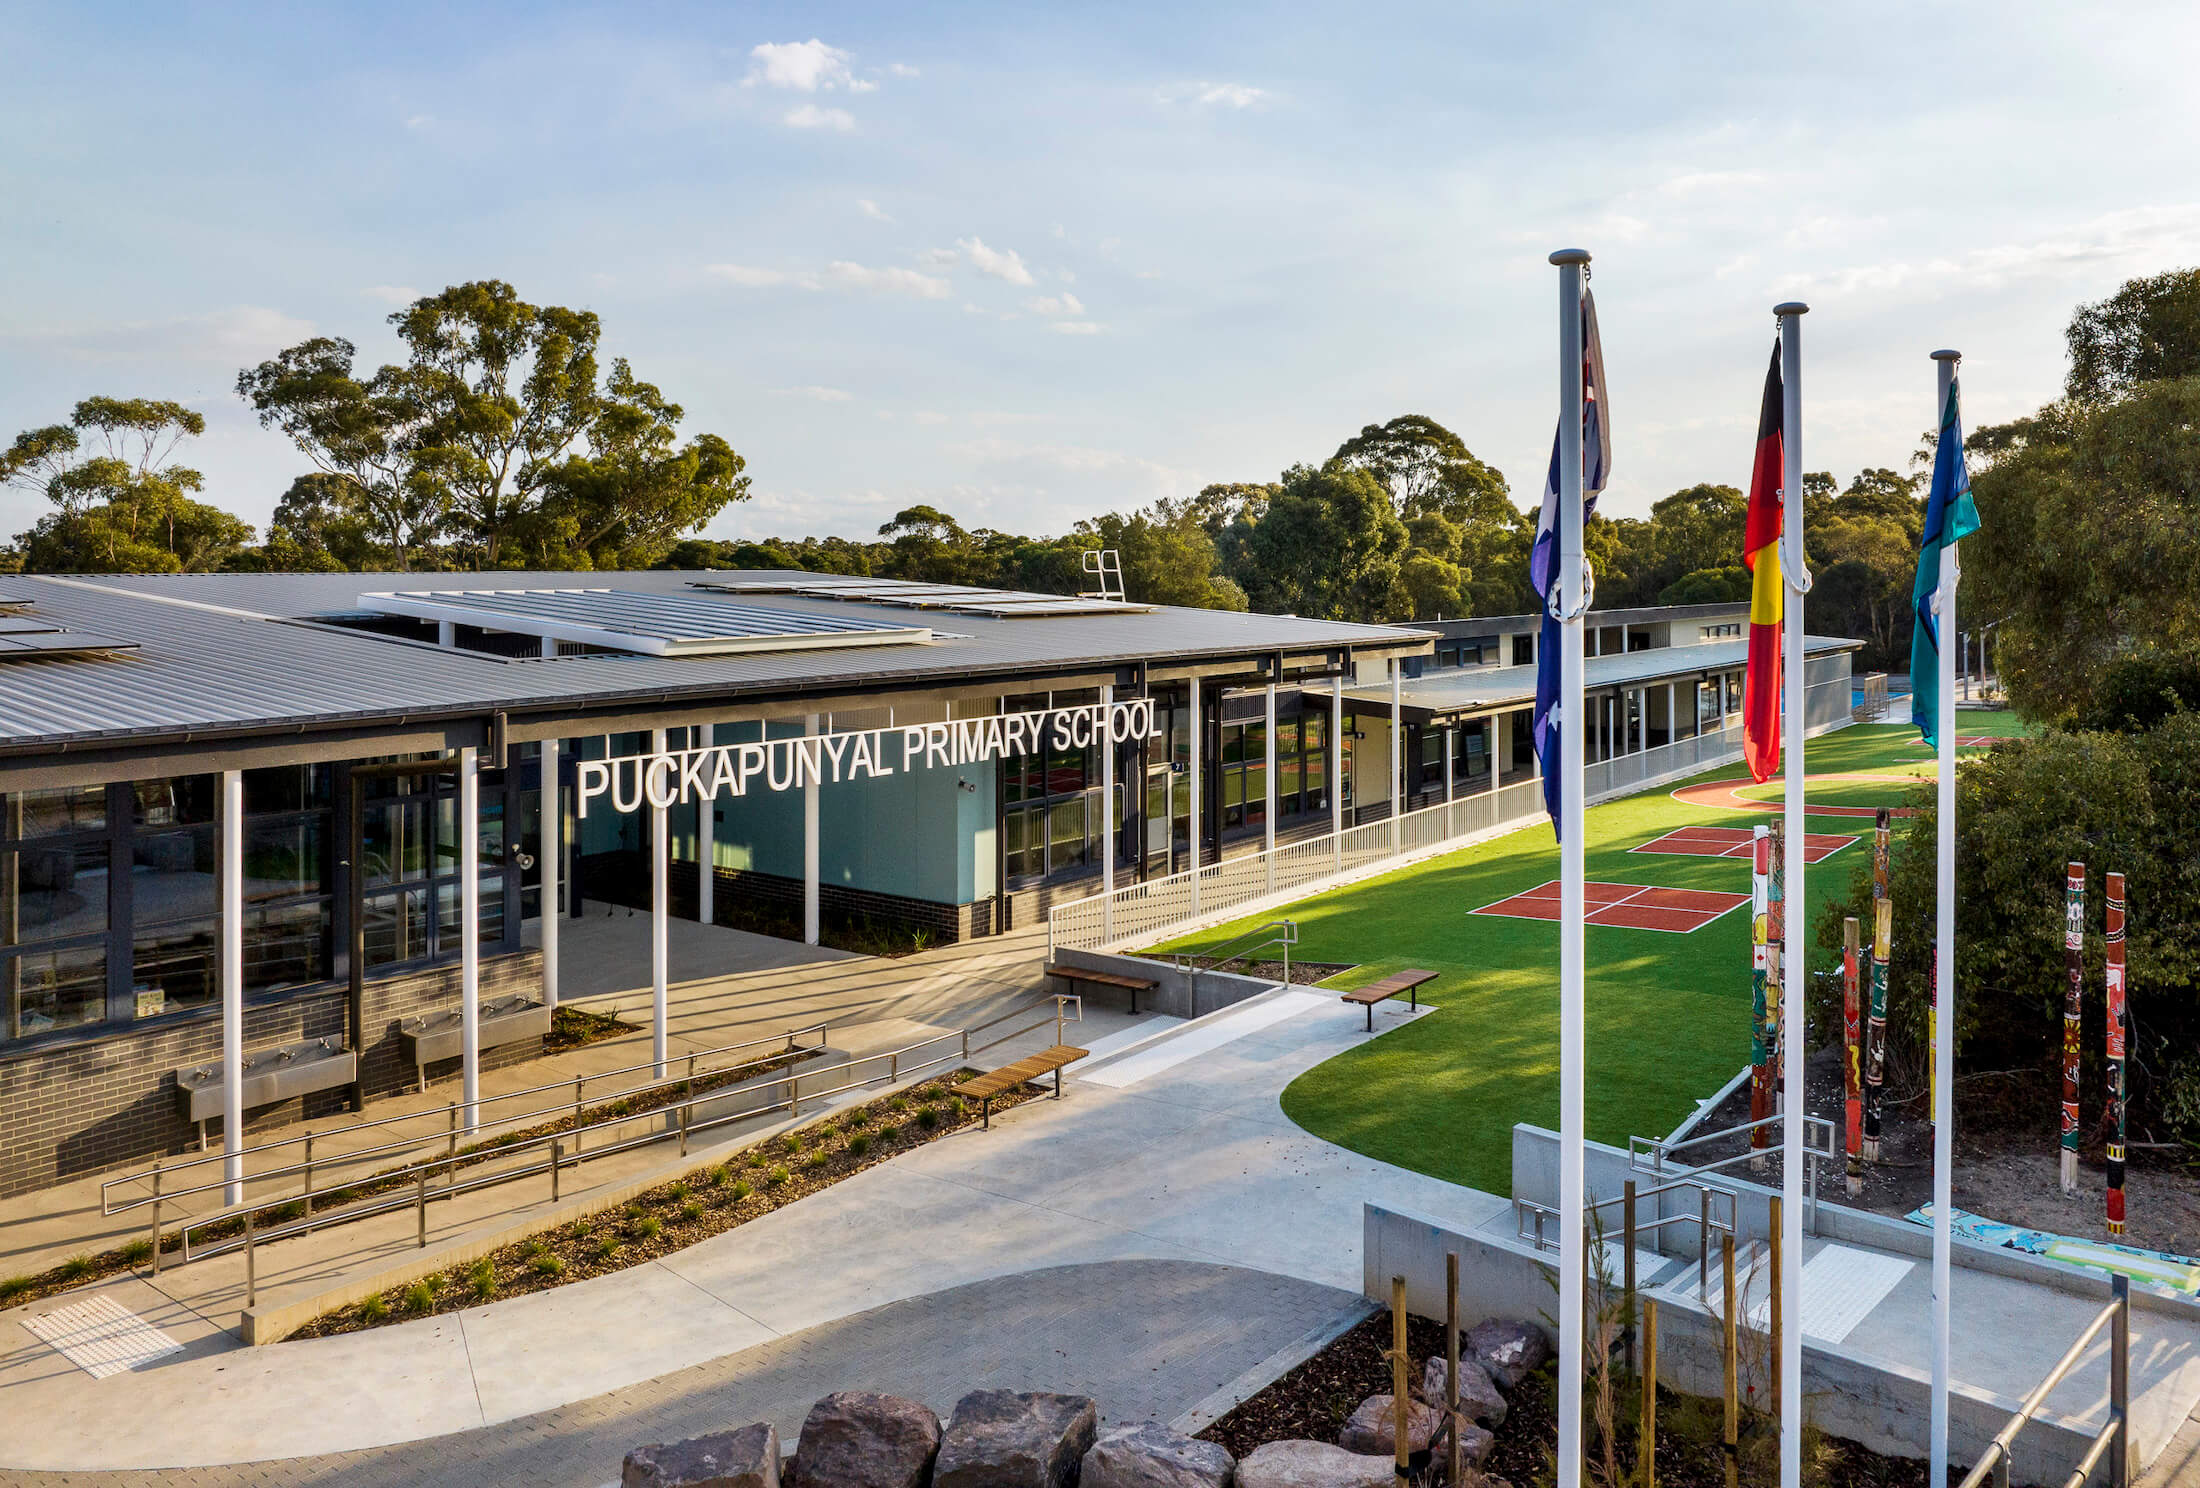 Puckapunyal Primary School forecourt with ram and stairs, turfed areas and flags in foreground.